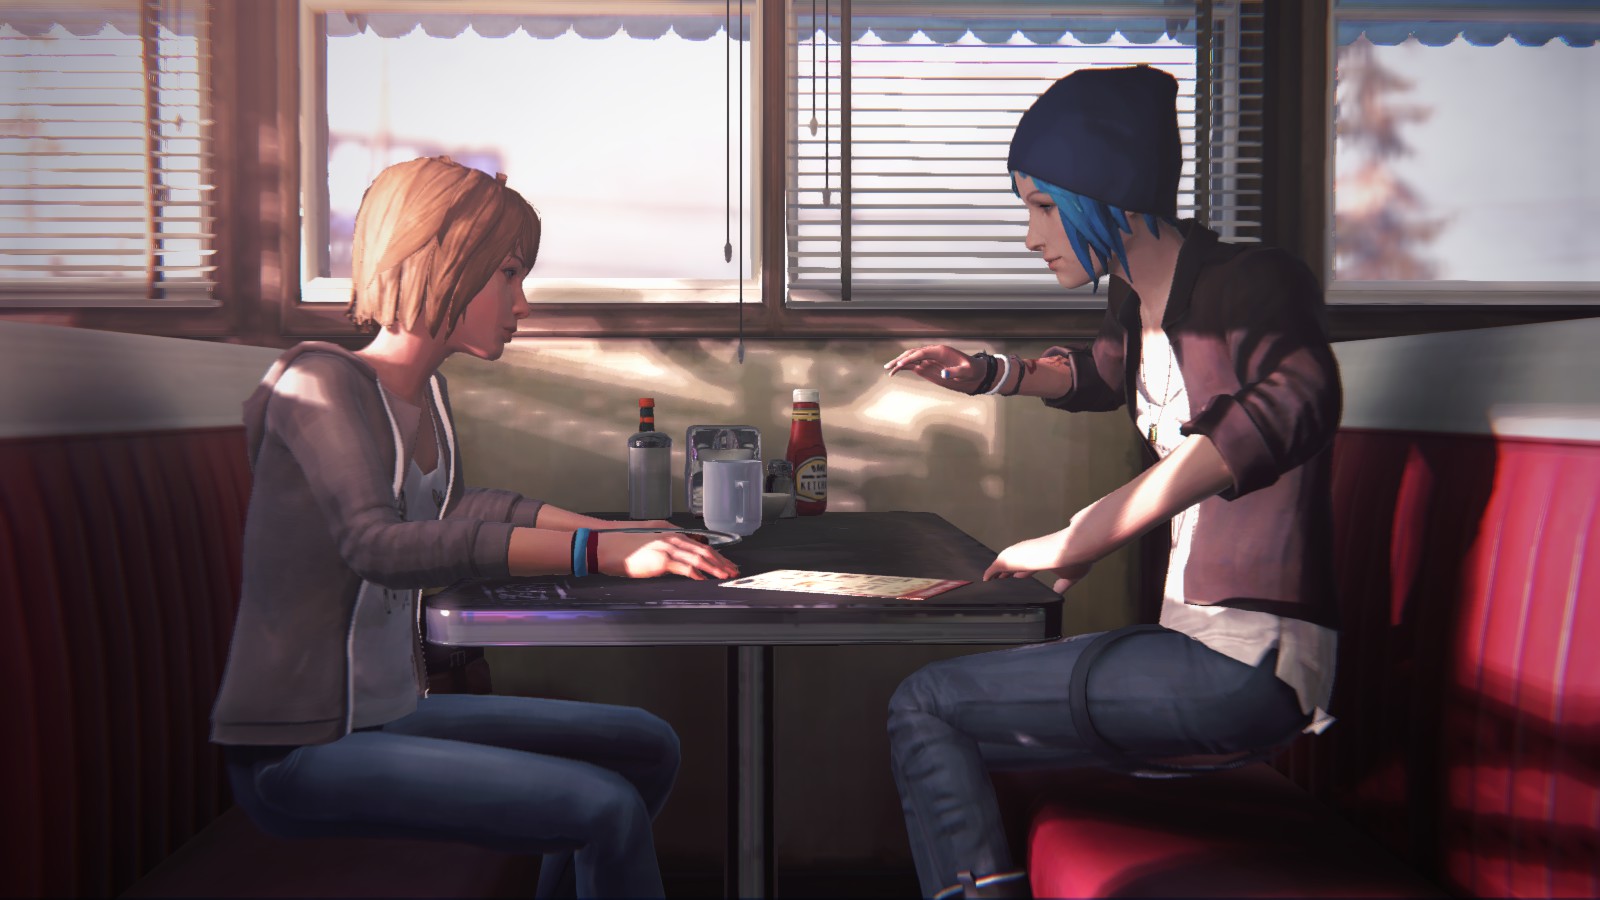 Life Is Strange Two Whales Diner Max Caulfield Chloe Price 1600x900